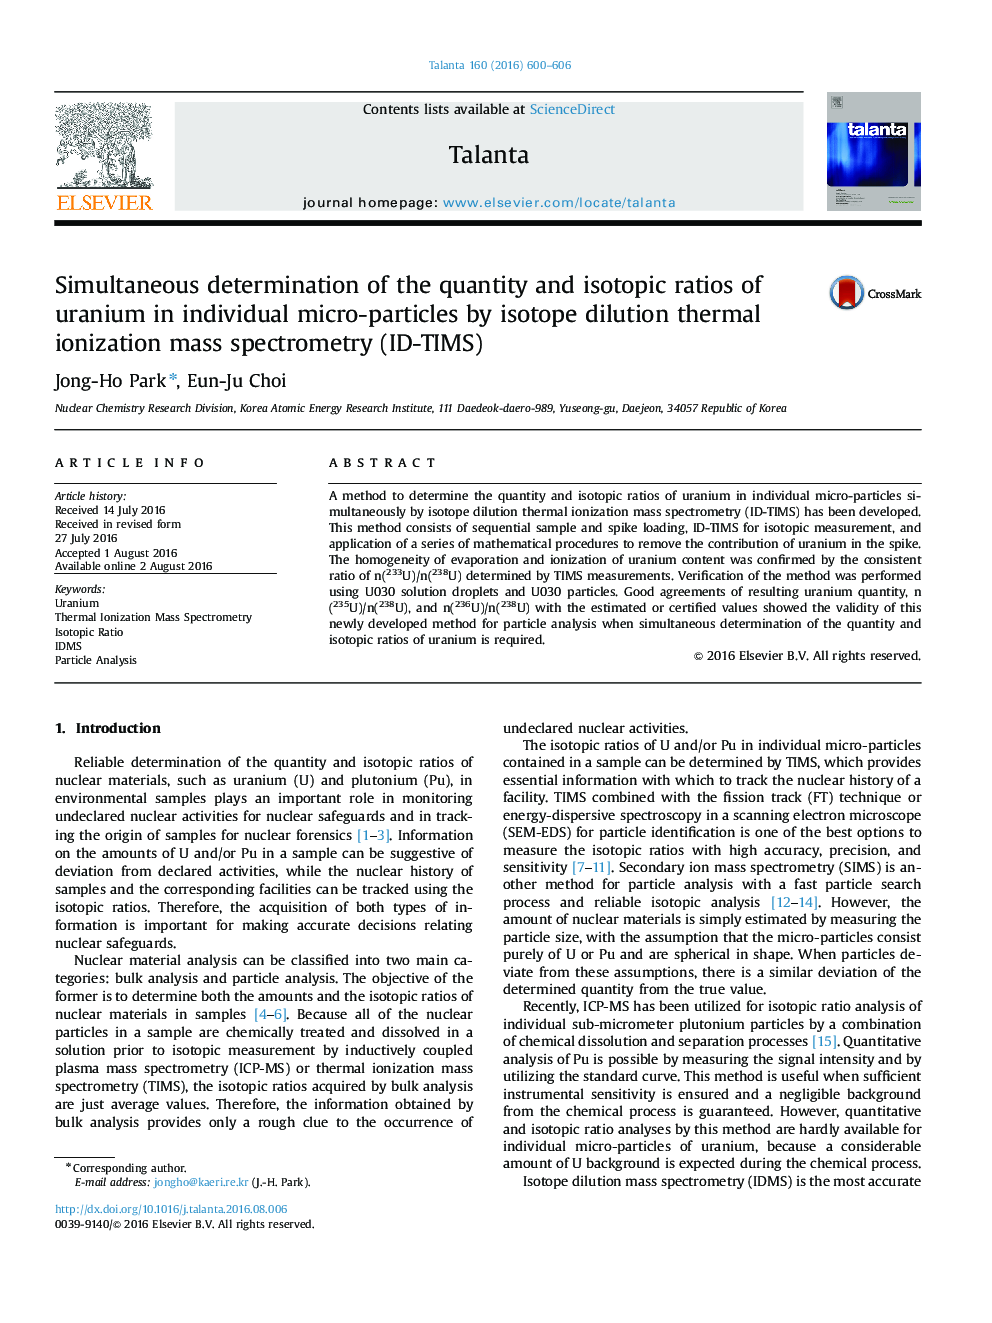 Simultaneous determination of the quantity and isotopic ratios of uranium in individual micro-particles by isotope dilution thermal ionization mass spectrometry (ID-TIMS)